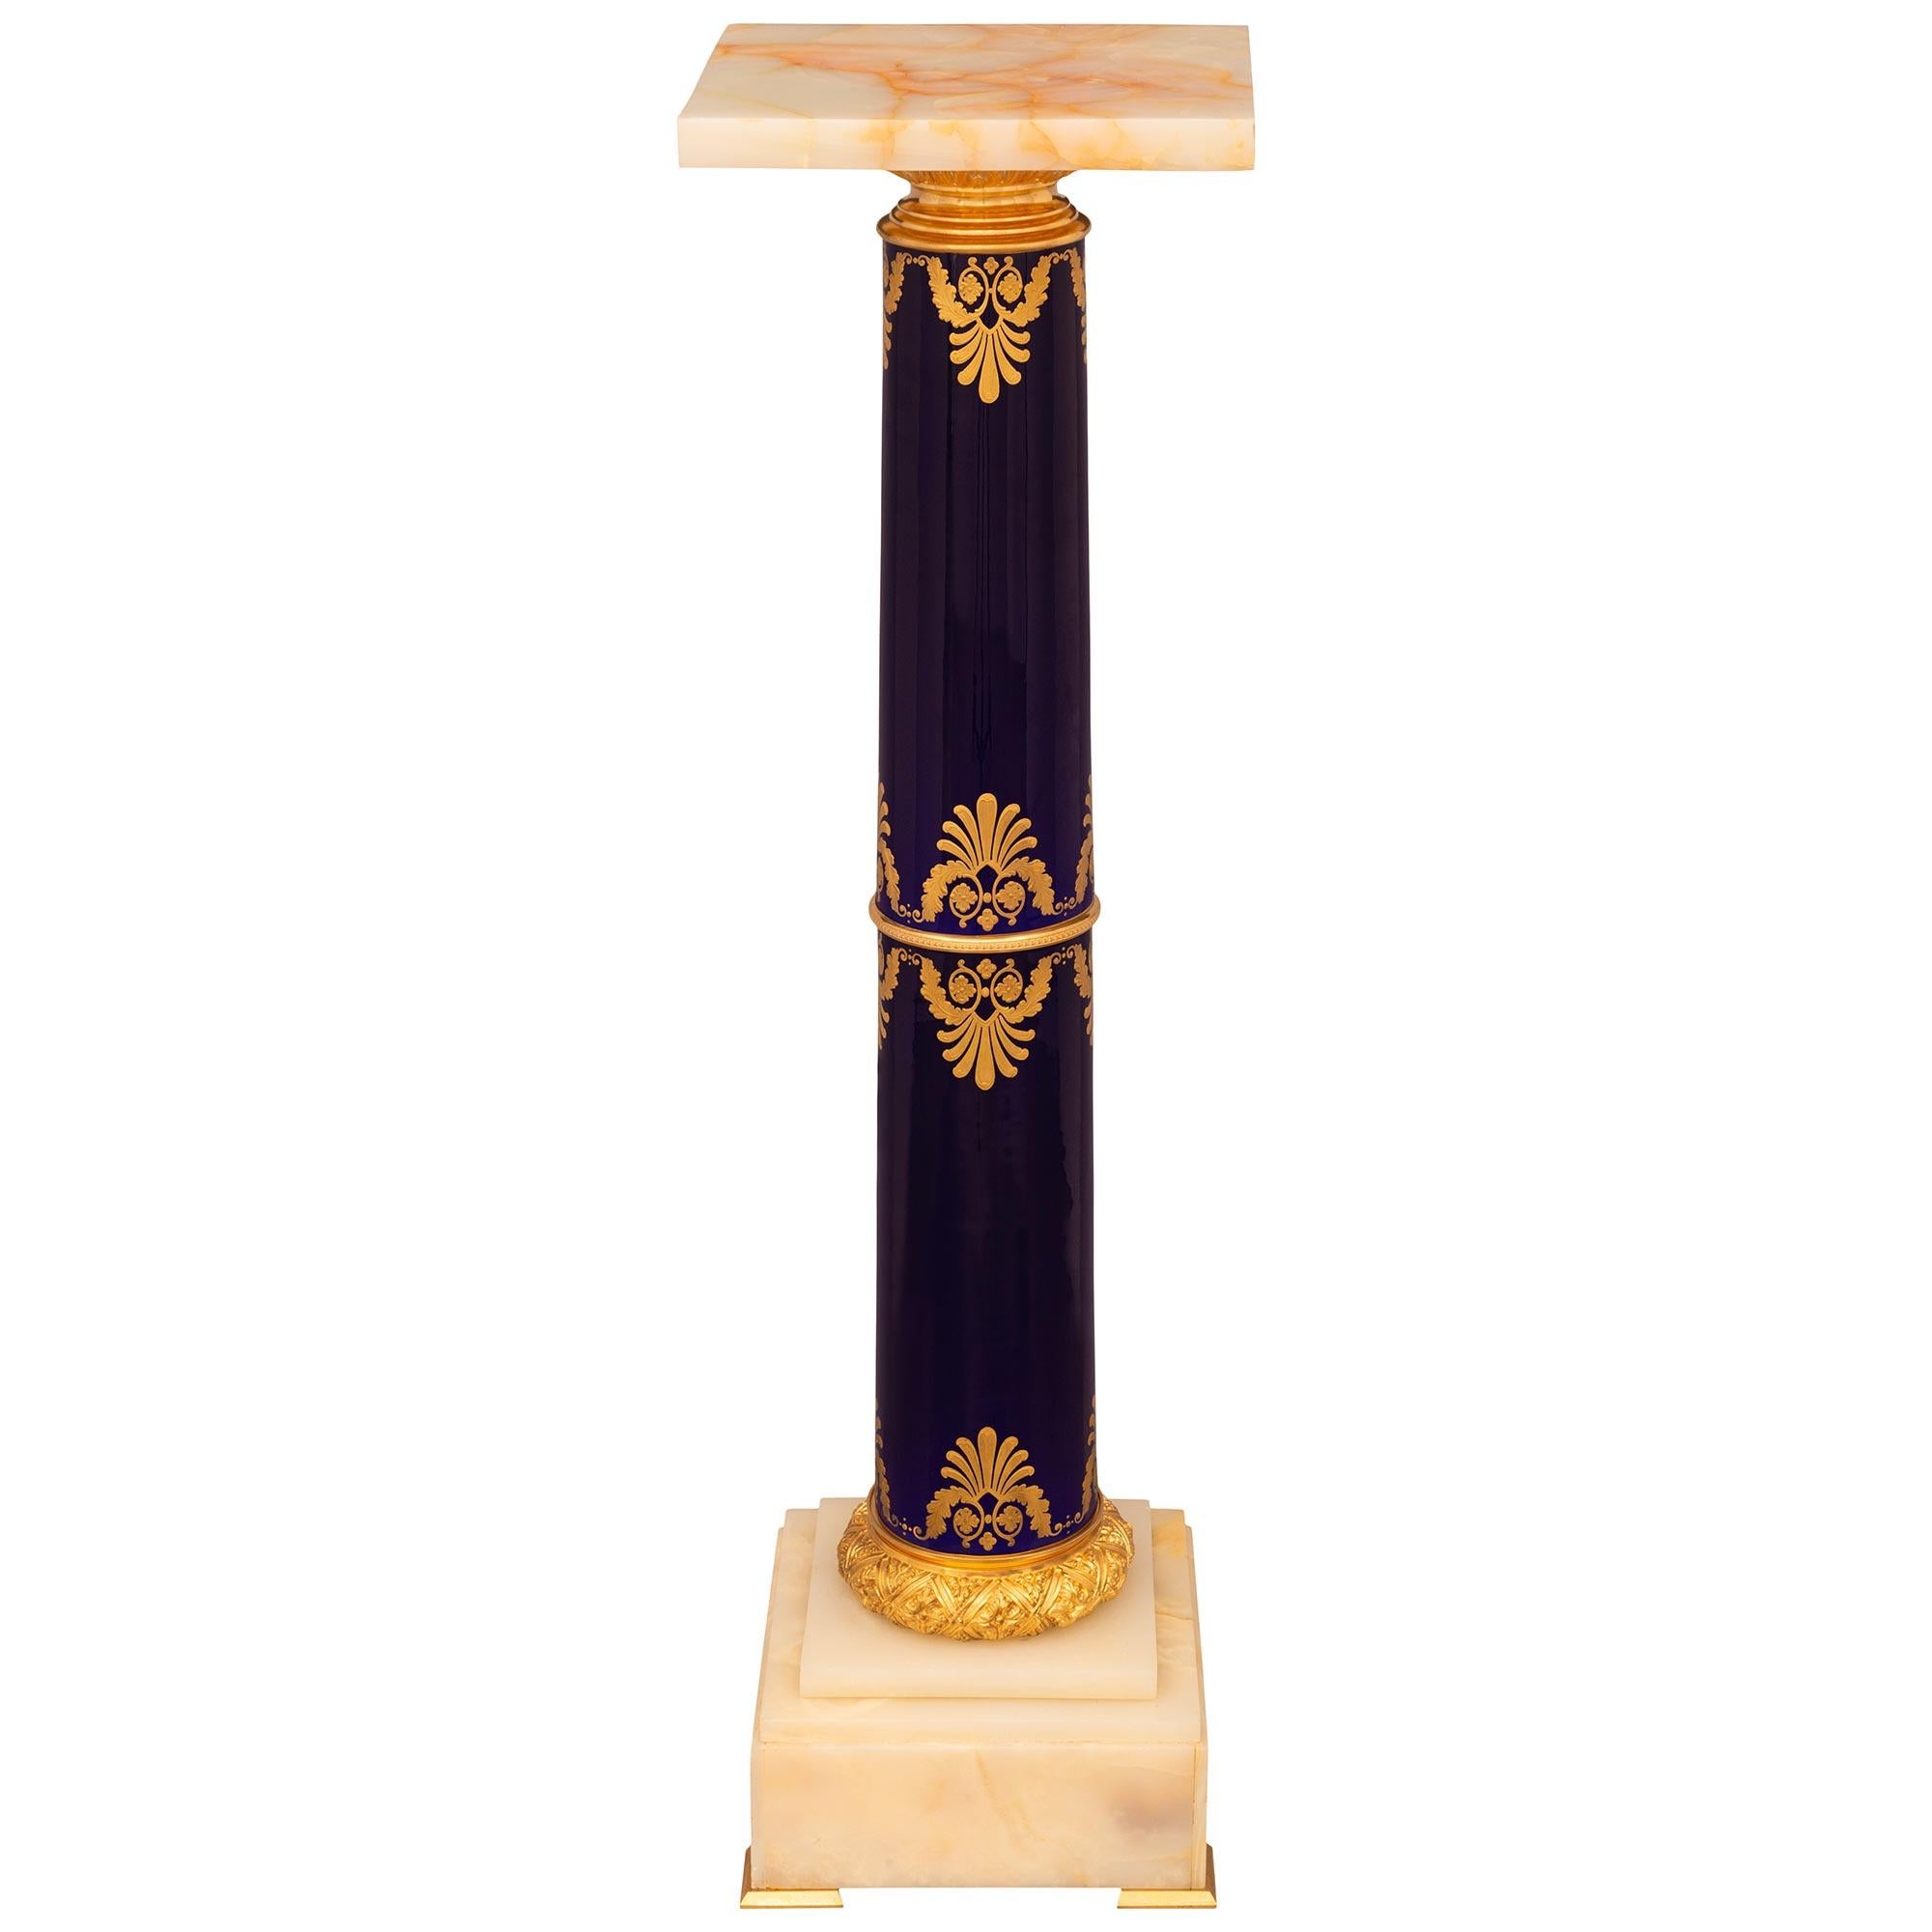 French 19th Century Empire St. Sèvres Porcelain, Gilt, Onyx, And Ormolu Pedestal In Good Condition For Sale In West Palm Beach, FL